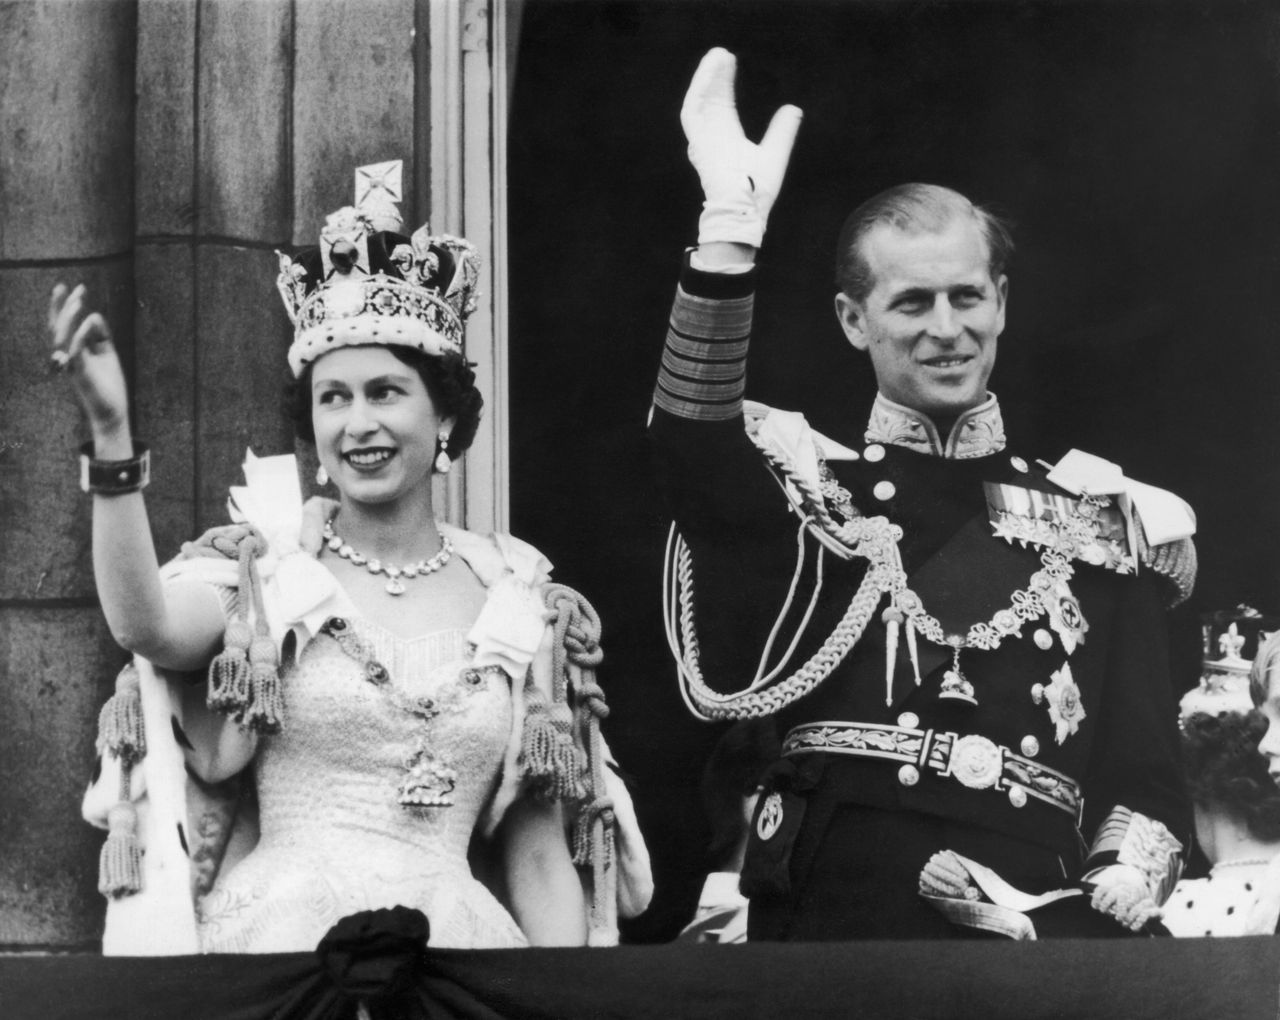 Queen Elizabeth II and the Duke of Edinburgh wave at the crowds from the balcony at Buckingham Palace after Elizabeth's coronation in June 1953.